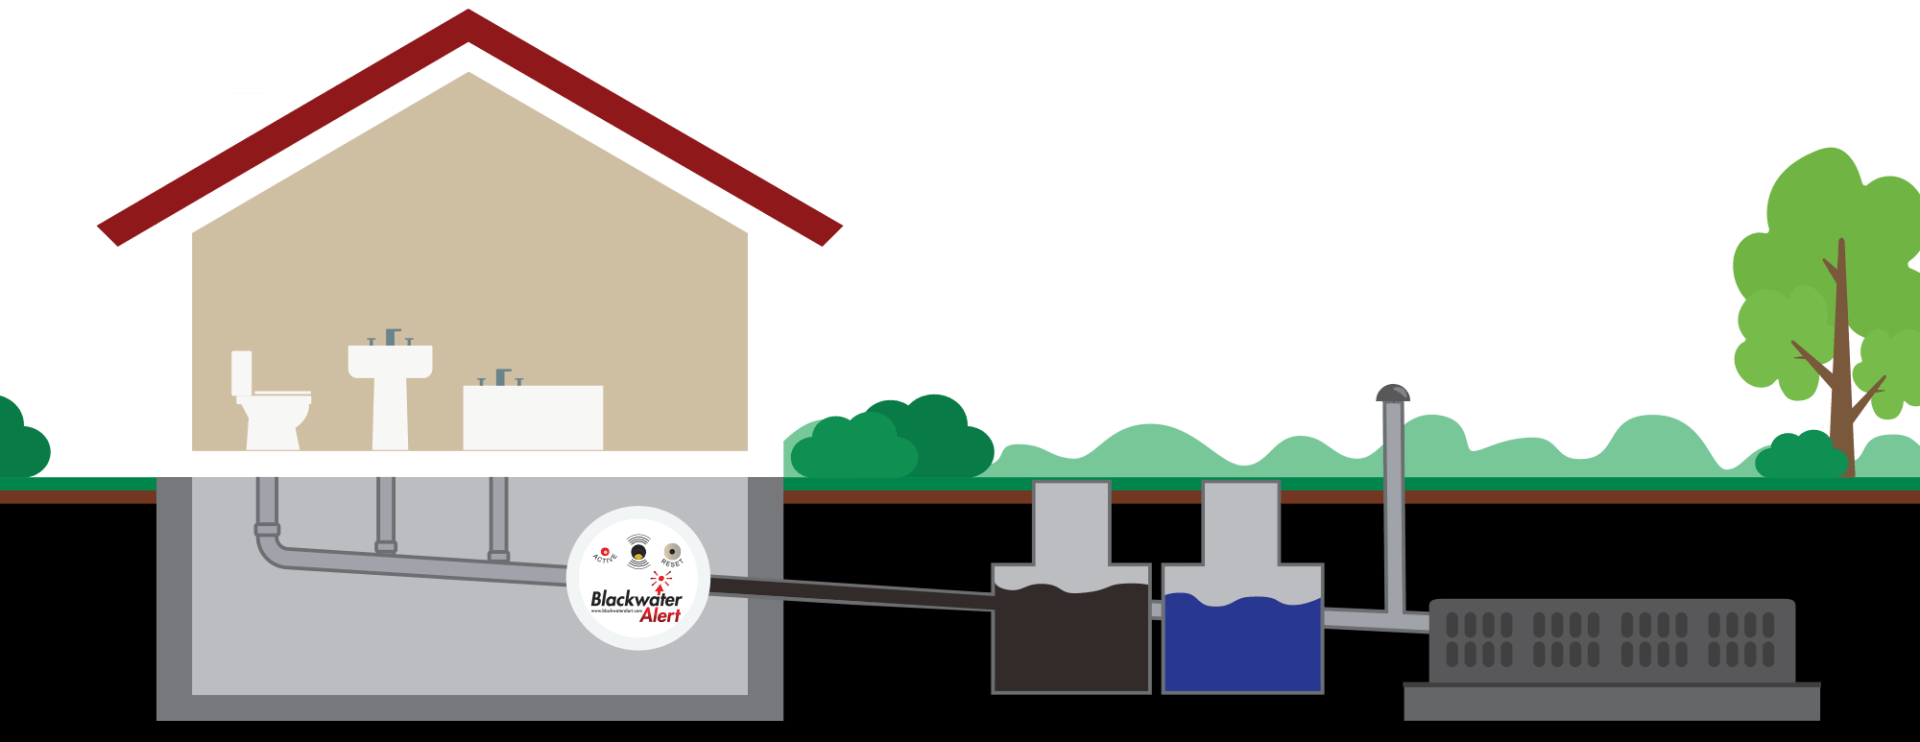 How to avoid basement flooding from septic or sewer backup